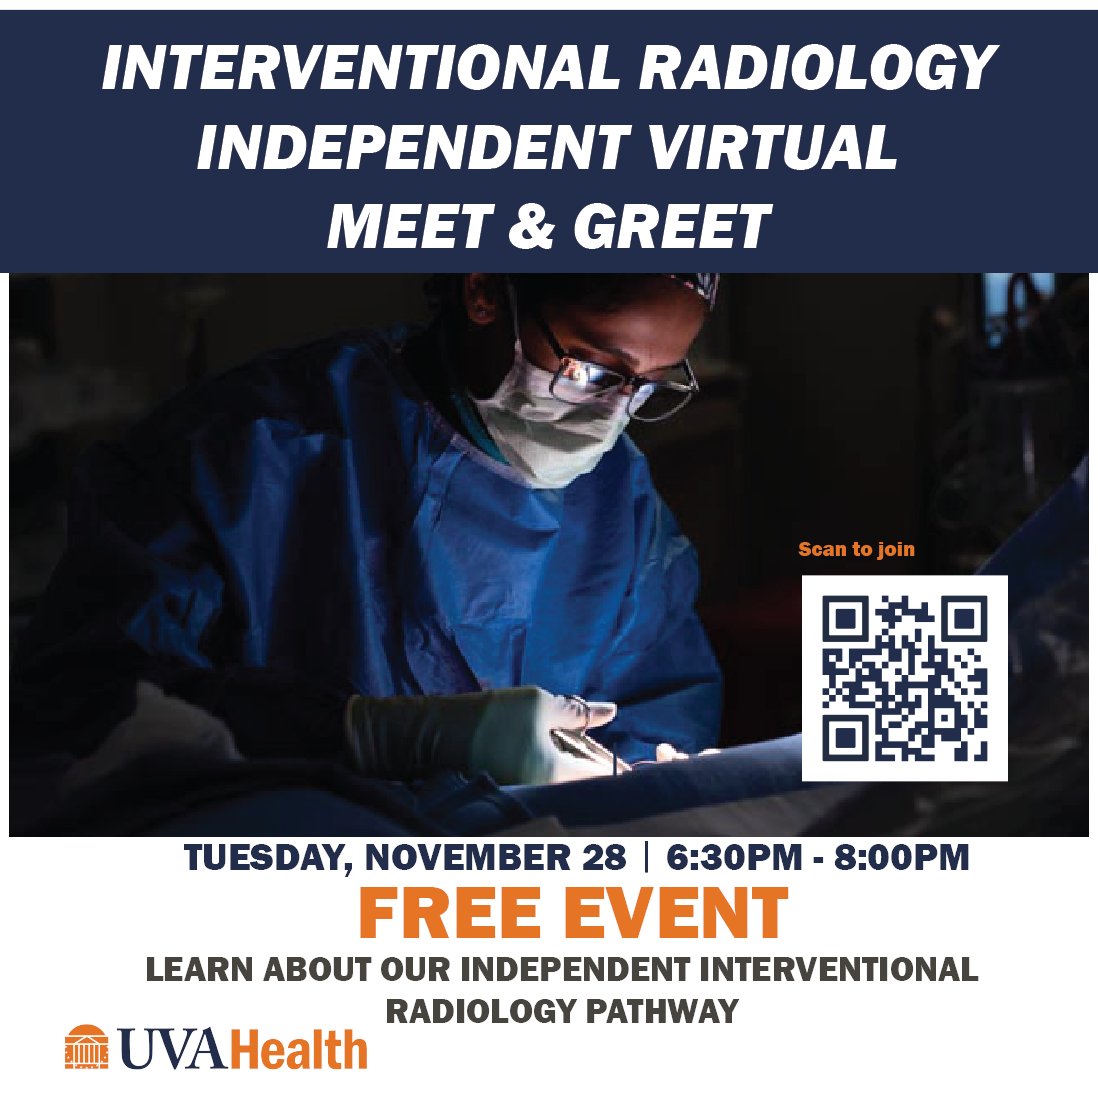 Are you looking to take the next steps in your radiology journey? If you're a current resident, join us this Tuesday, November 28th for an information session about our Interventional Radiology Independent Pathway! Learn about how you can advance your career from 6:30PM - 8:00PM.